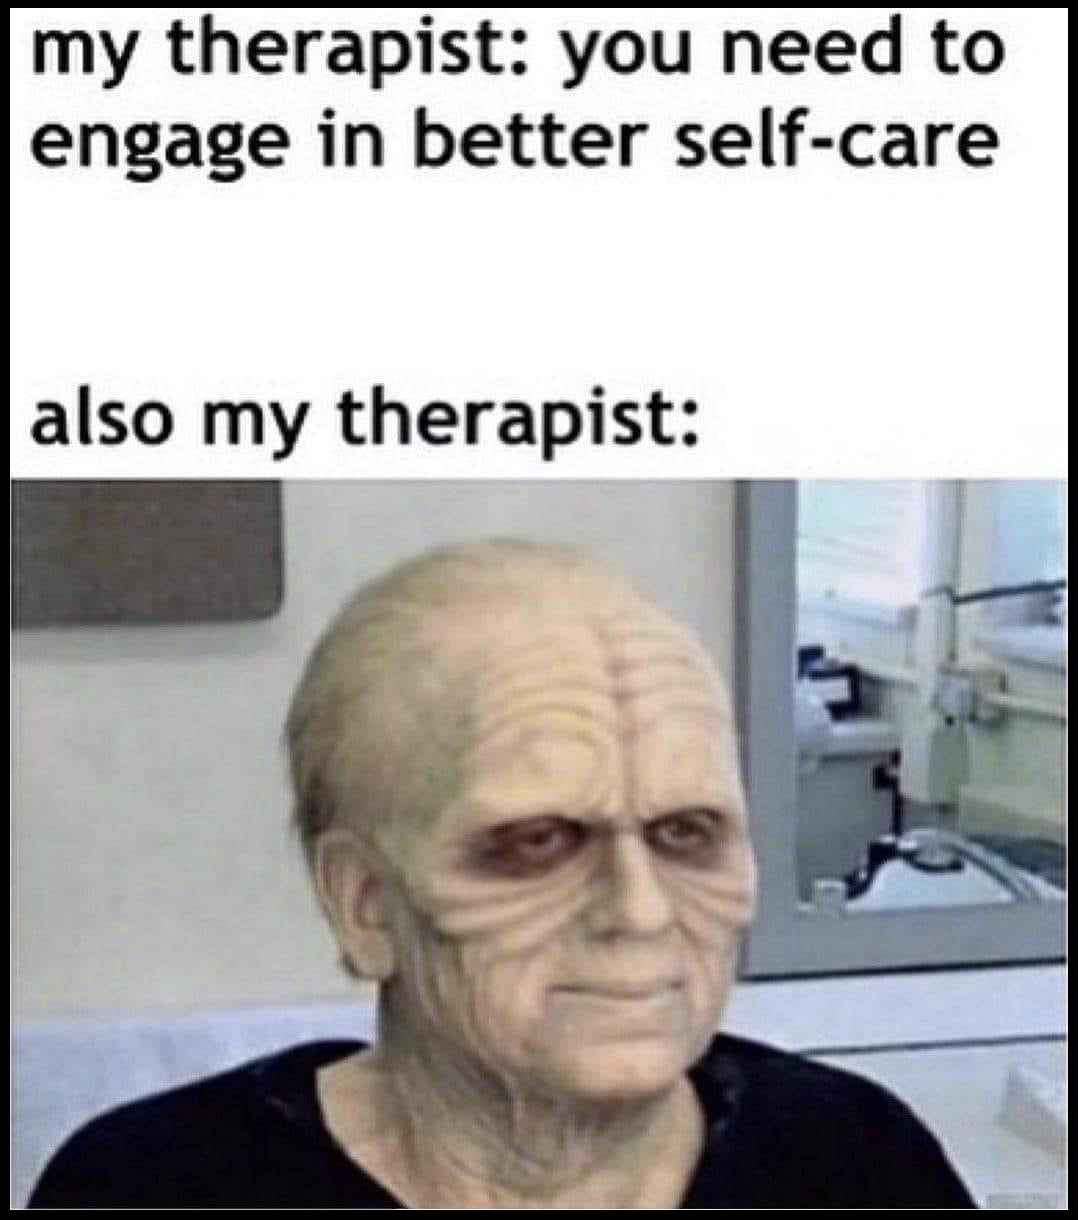 Photo ID: A meme post with a picture of the actor wearing Emperor Palpatine make-up under the text: "My Therapist: You need to engage in better self-care, also my therapist:"